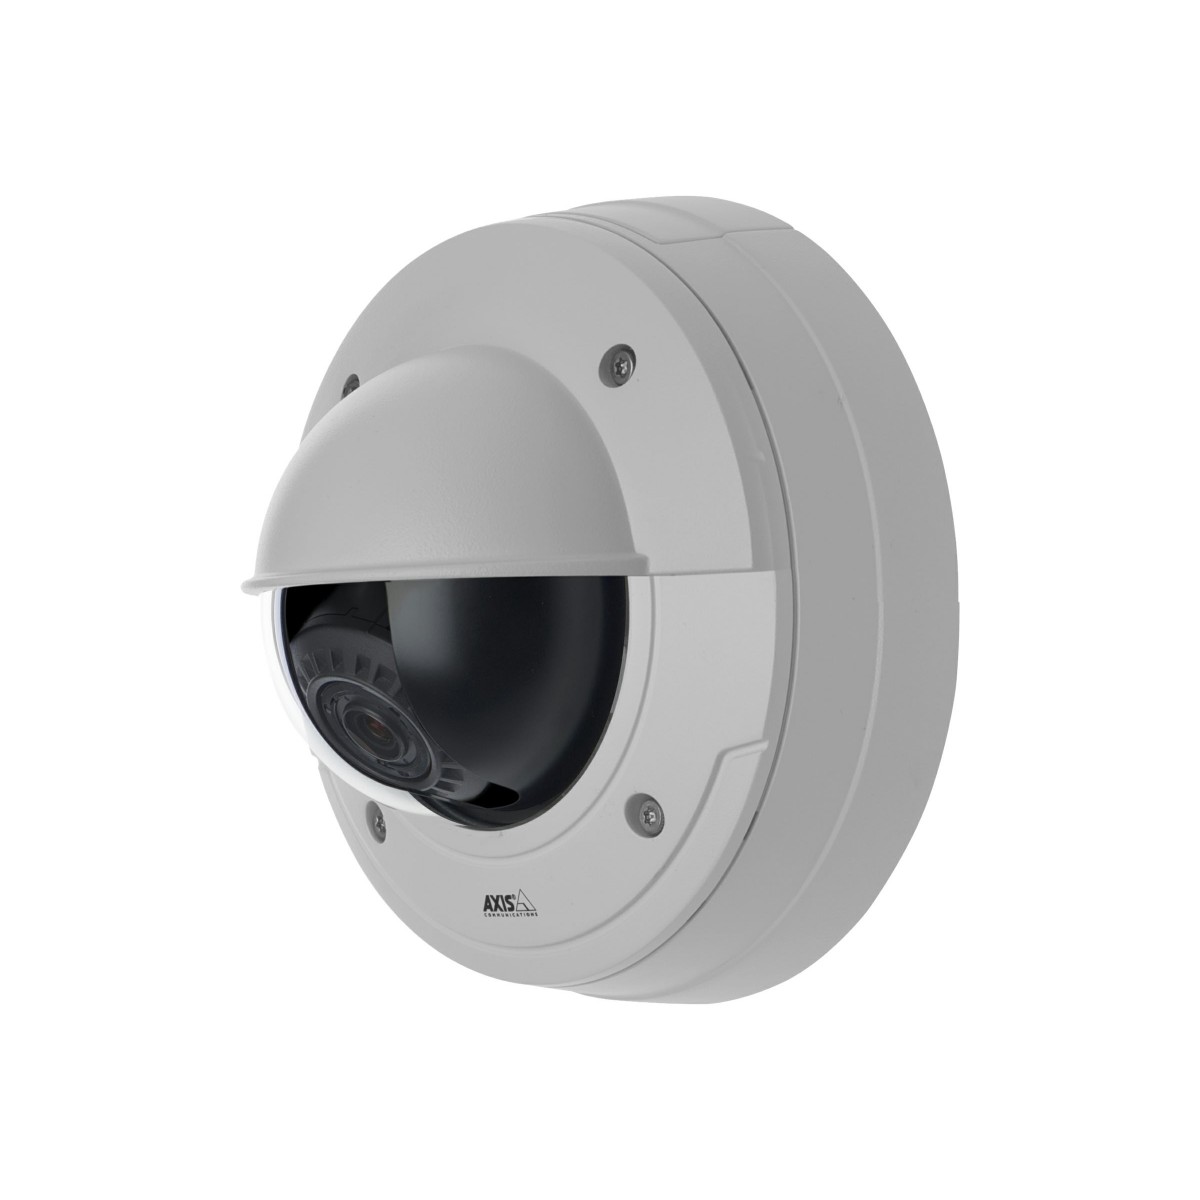 Axis P3364-VE 6mm - IP security camera - Outdoor - Wired - ARTPEC-4 - Dome - Black,White